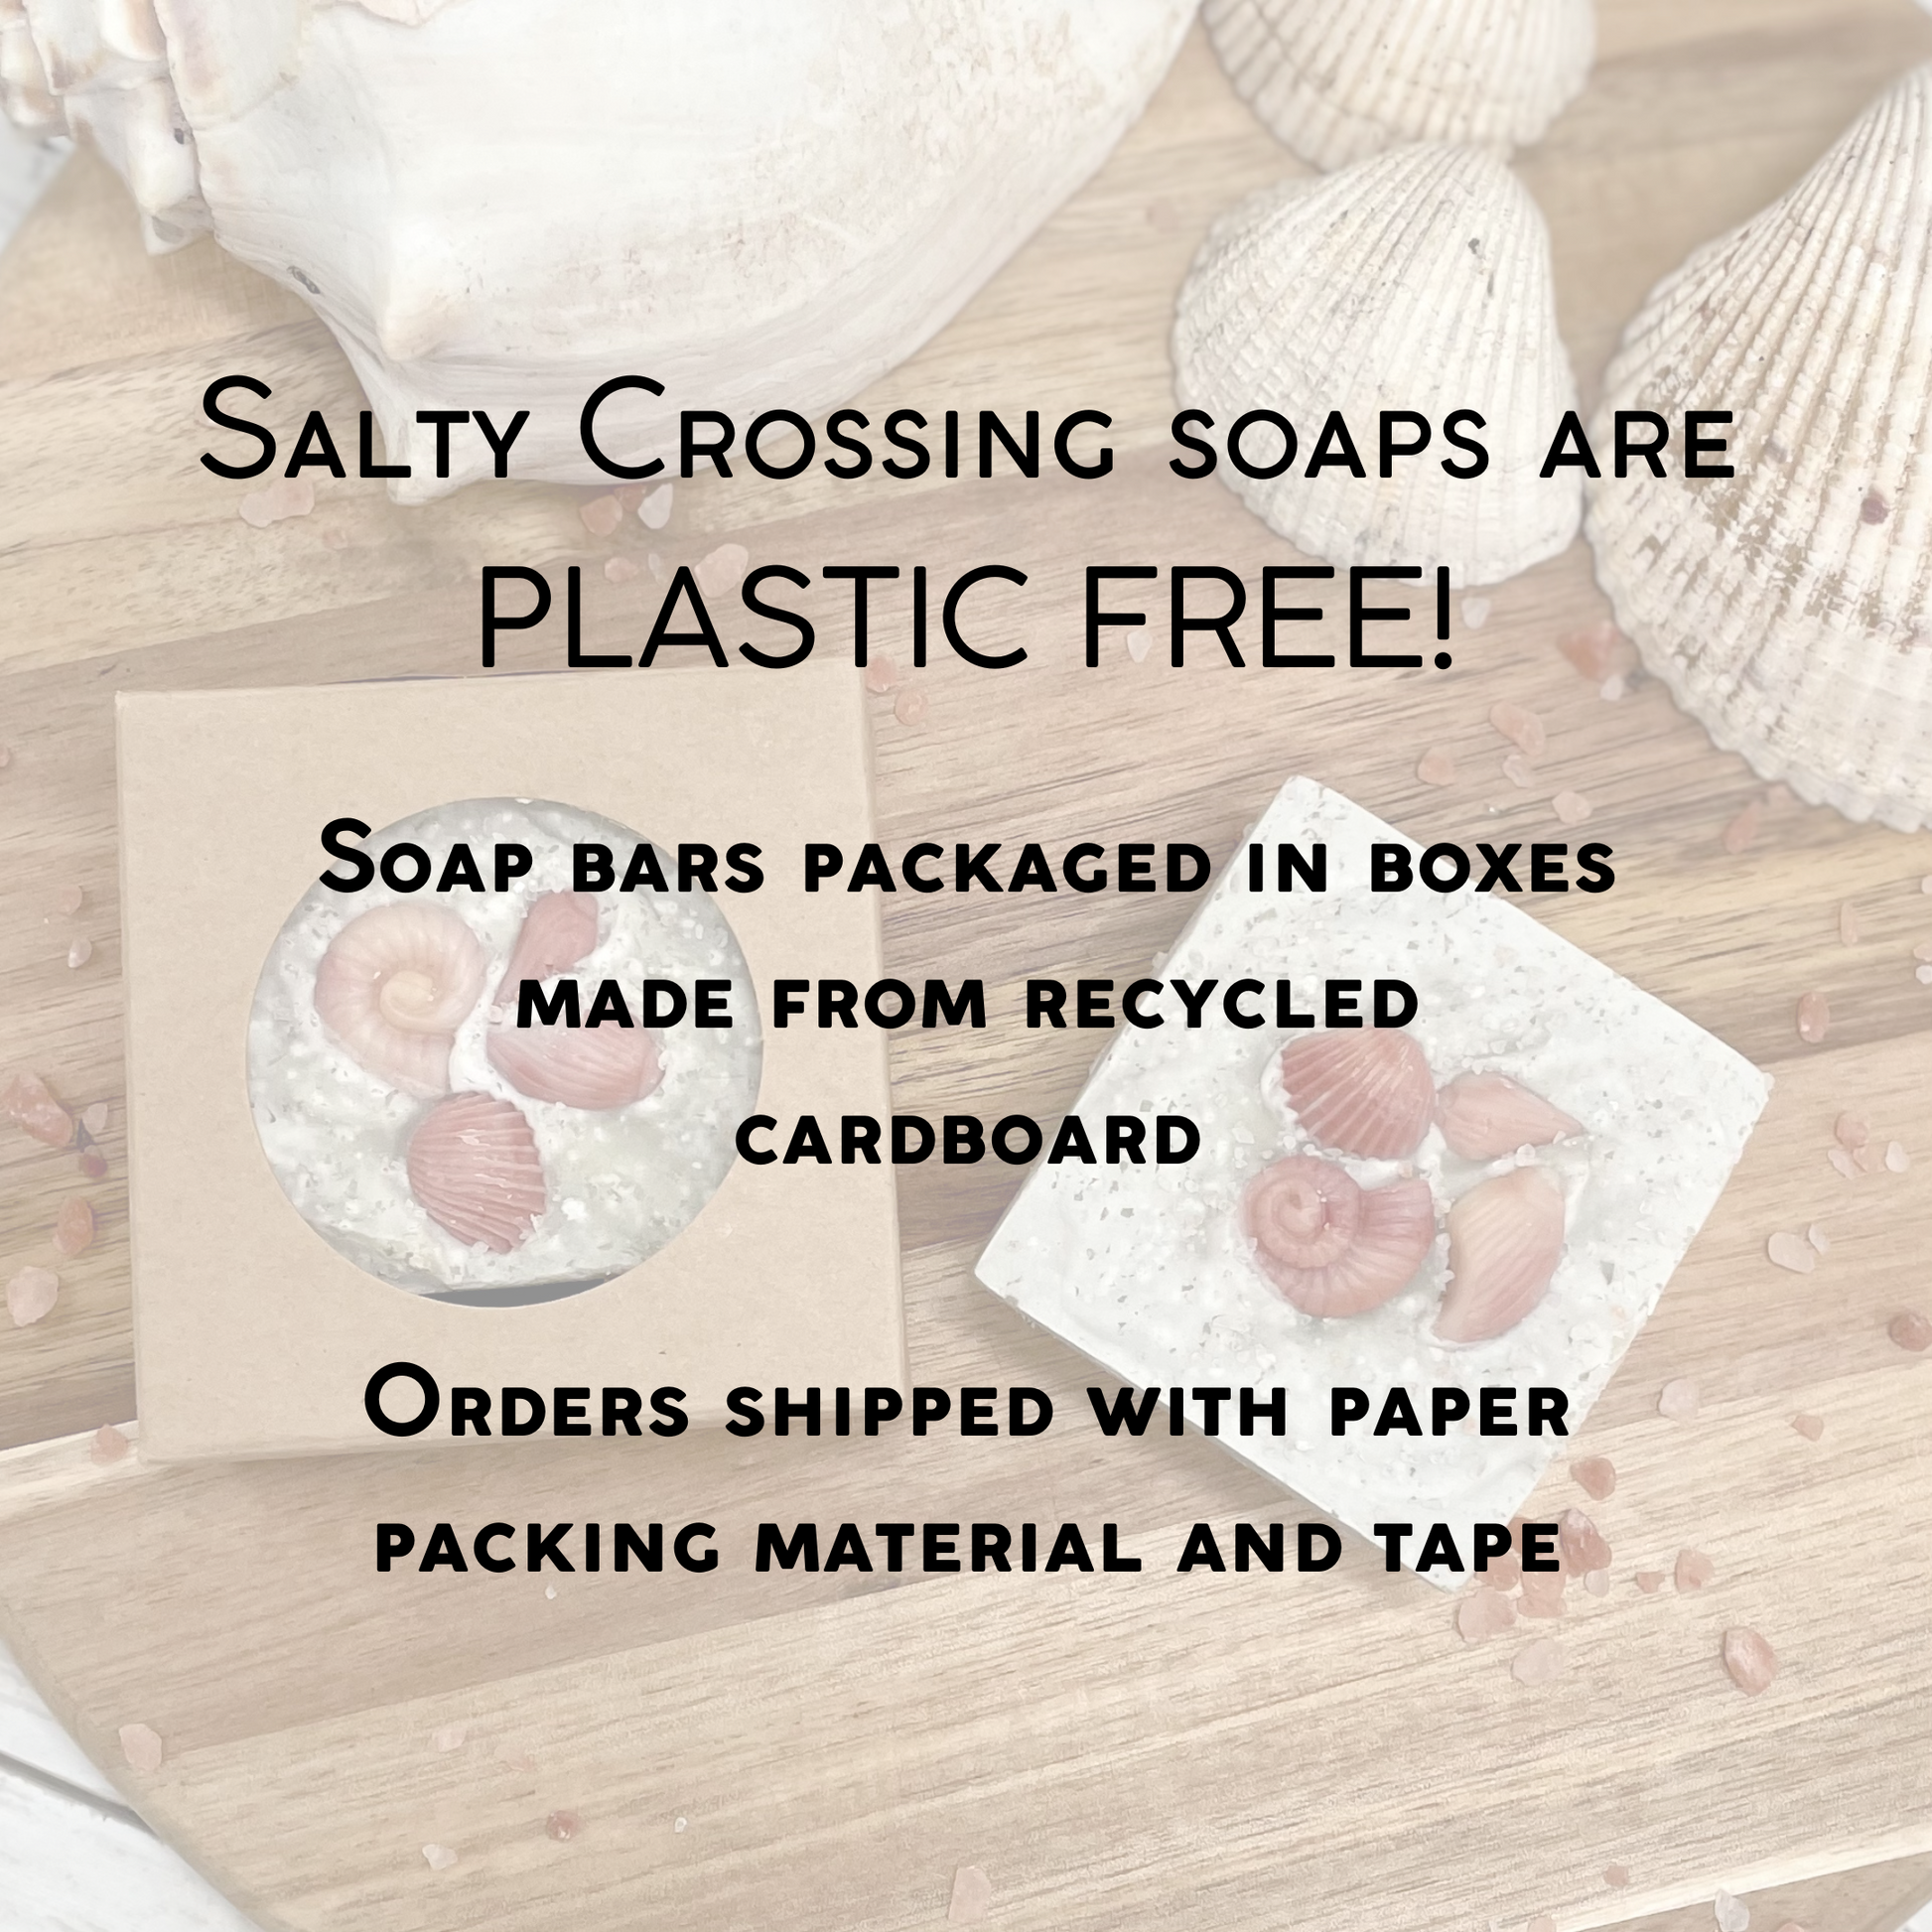 Salty Crossing soaps are plastic free! soap bars packaged in boxes made from recycled cardboard. orders shipped with paper packing material and tape.